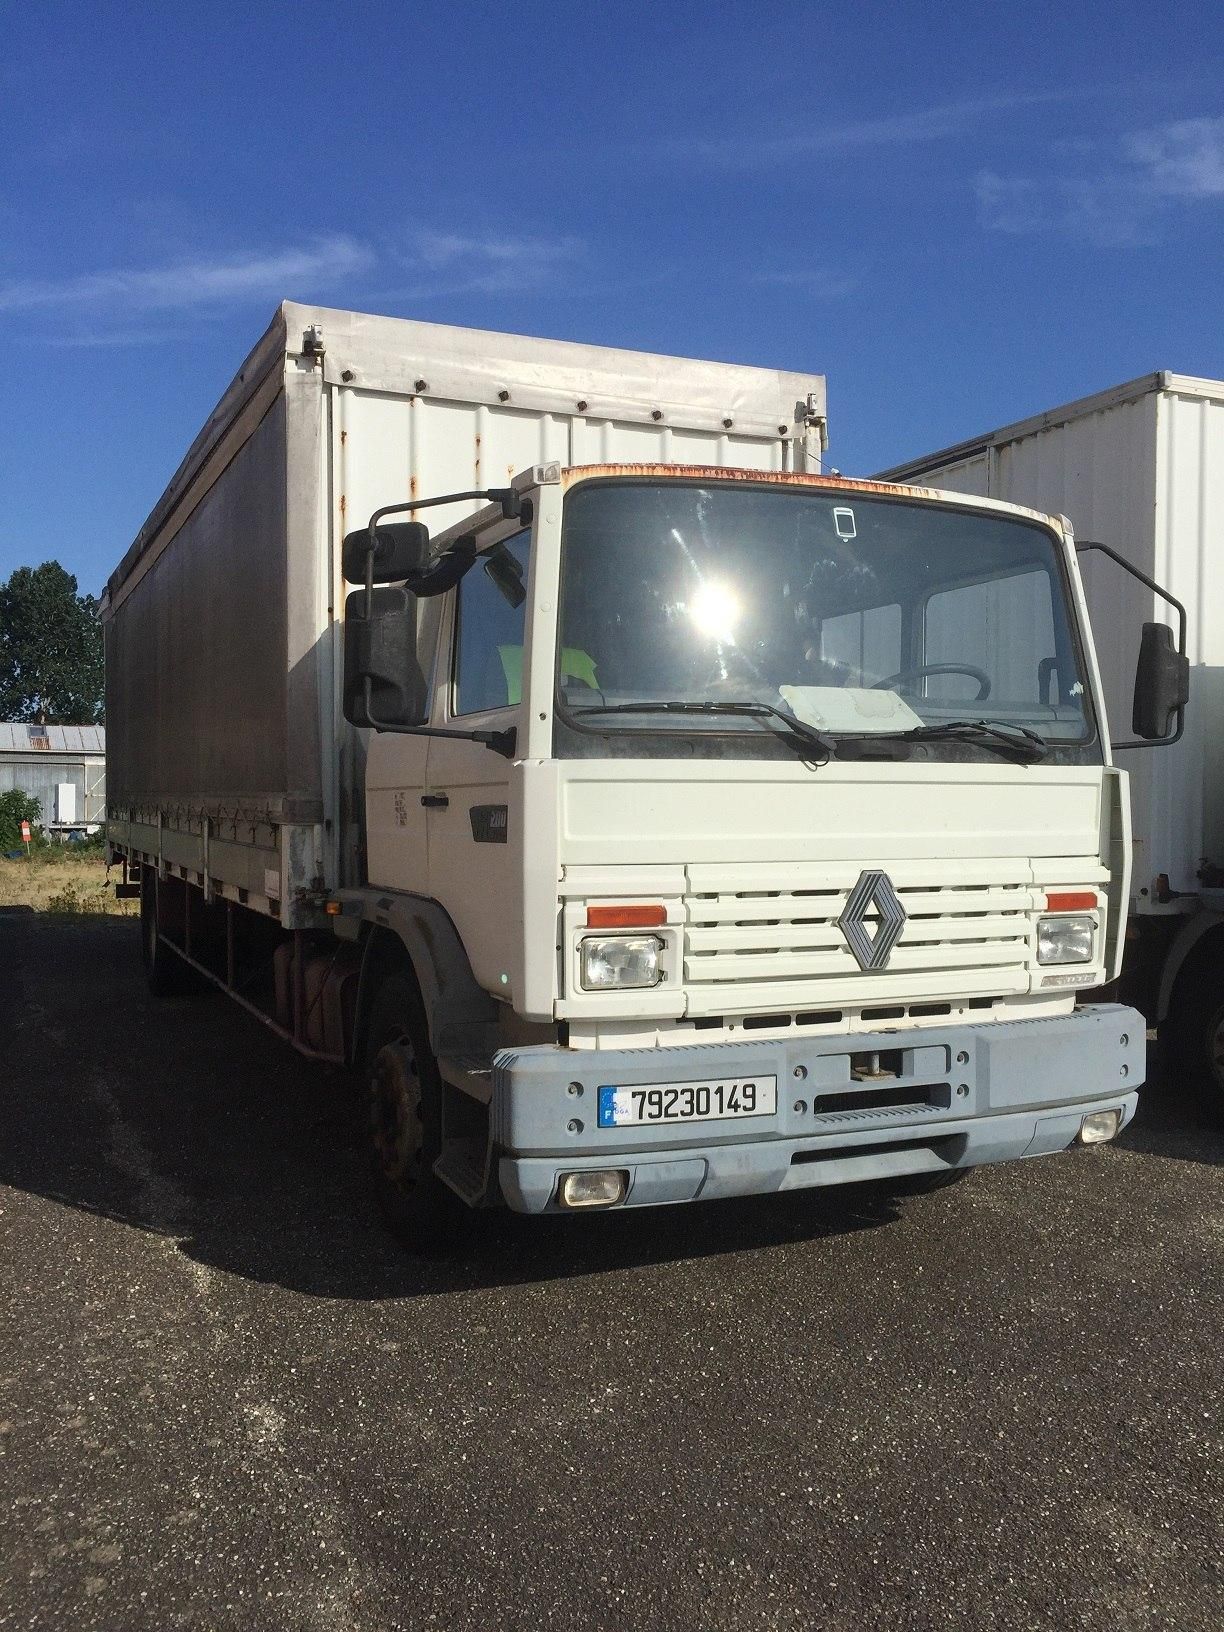 Null [RP][ACI] Reserved for professionals 
RENAULT M200 truck, diesel, imm. 7923&hellip;